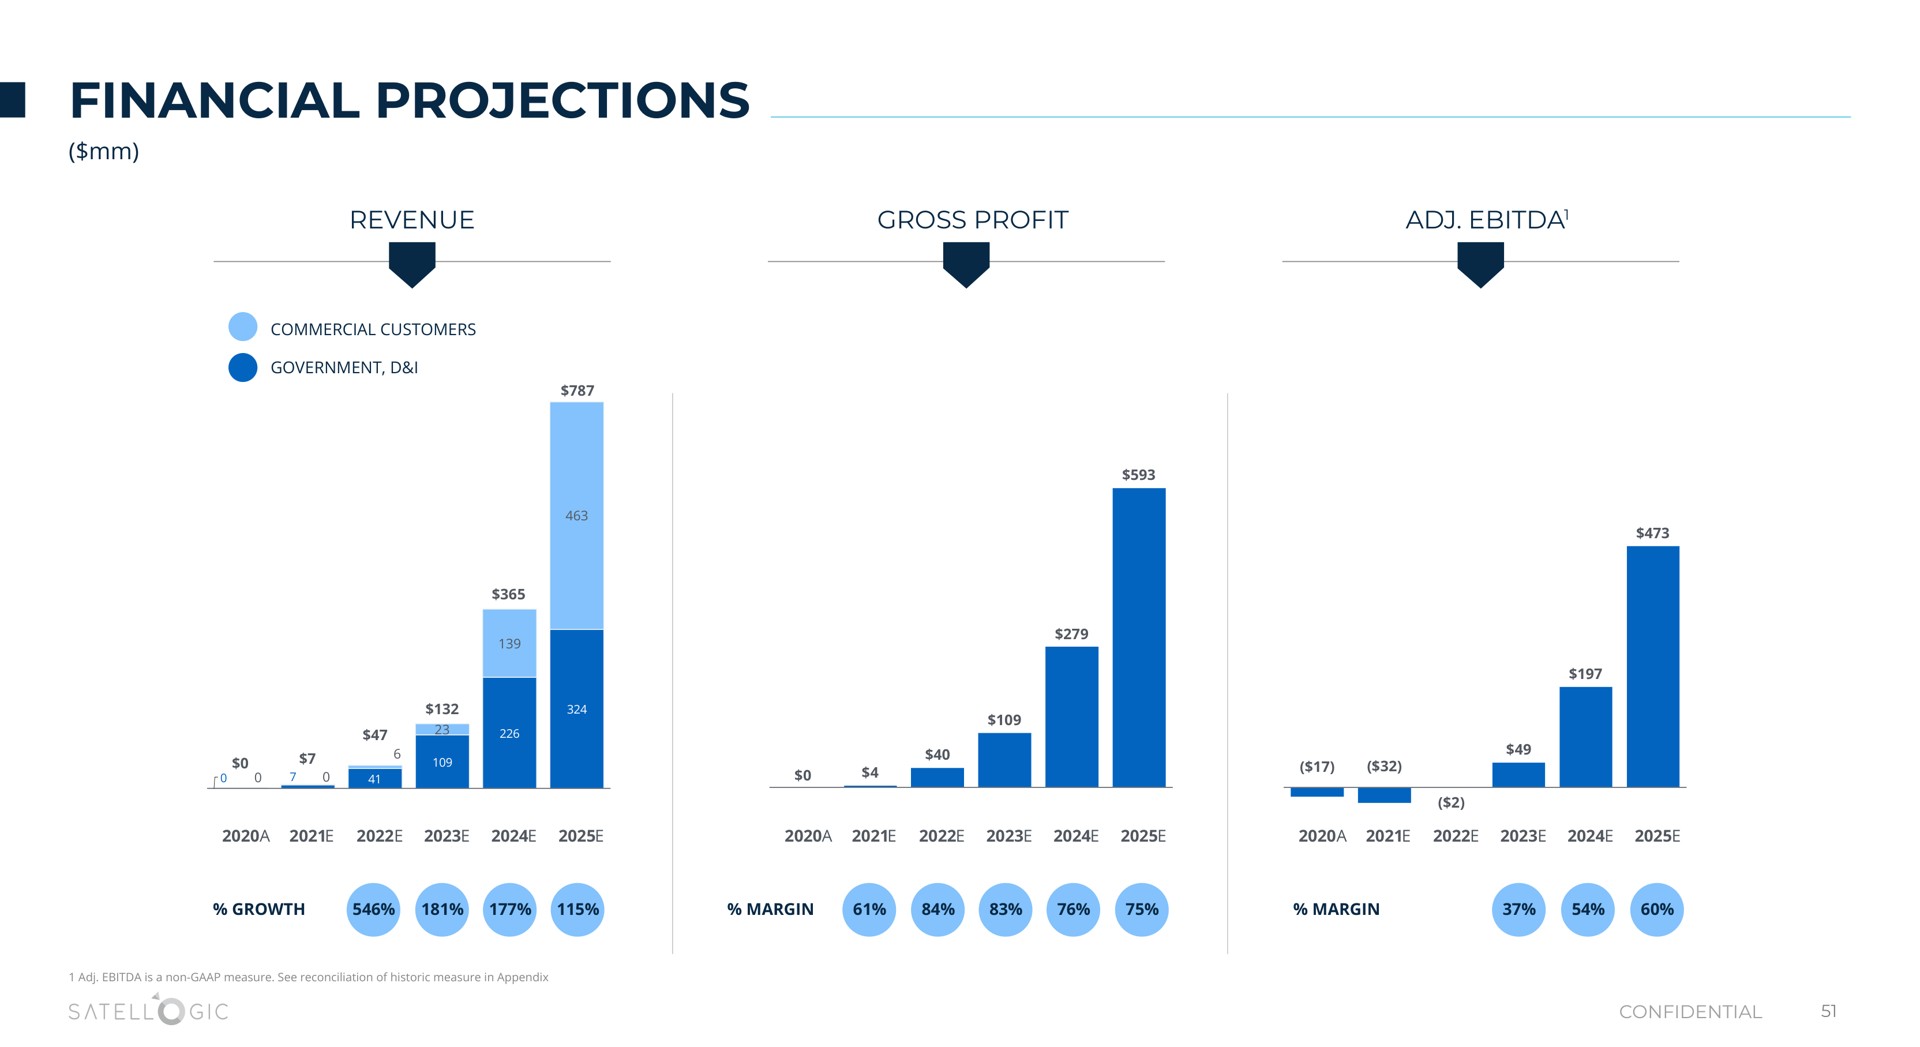 financial projections | Satellogic